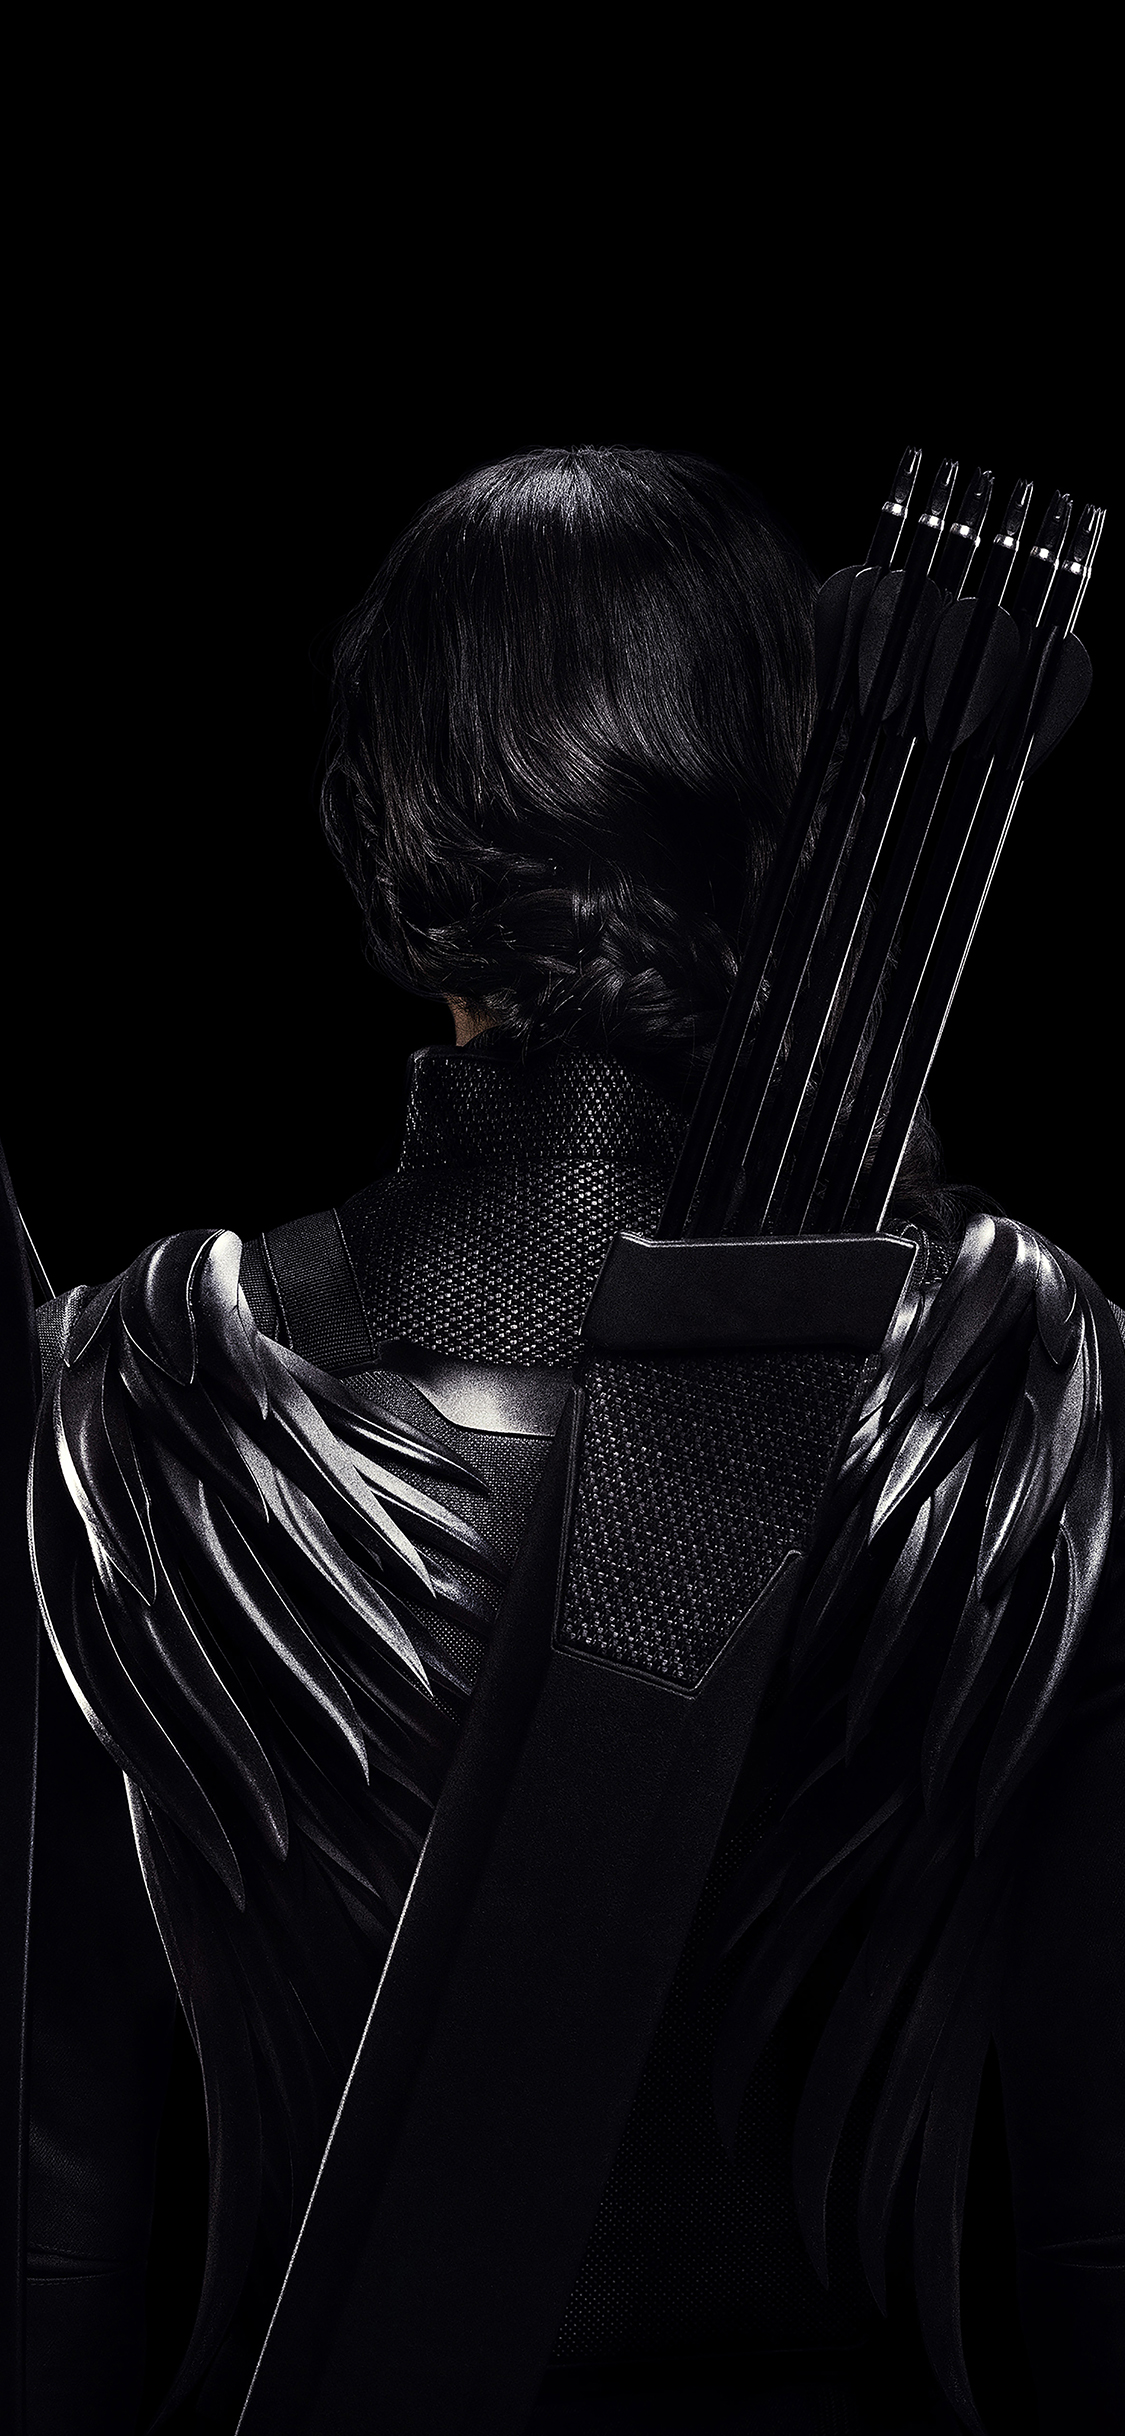 Hunger Games Wallpapers Pc - 1125x2436 Wallpaper 